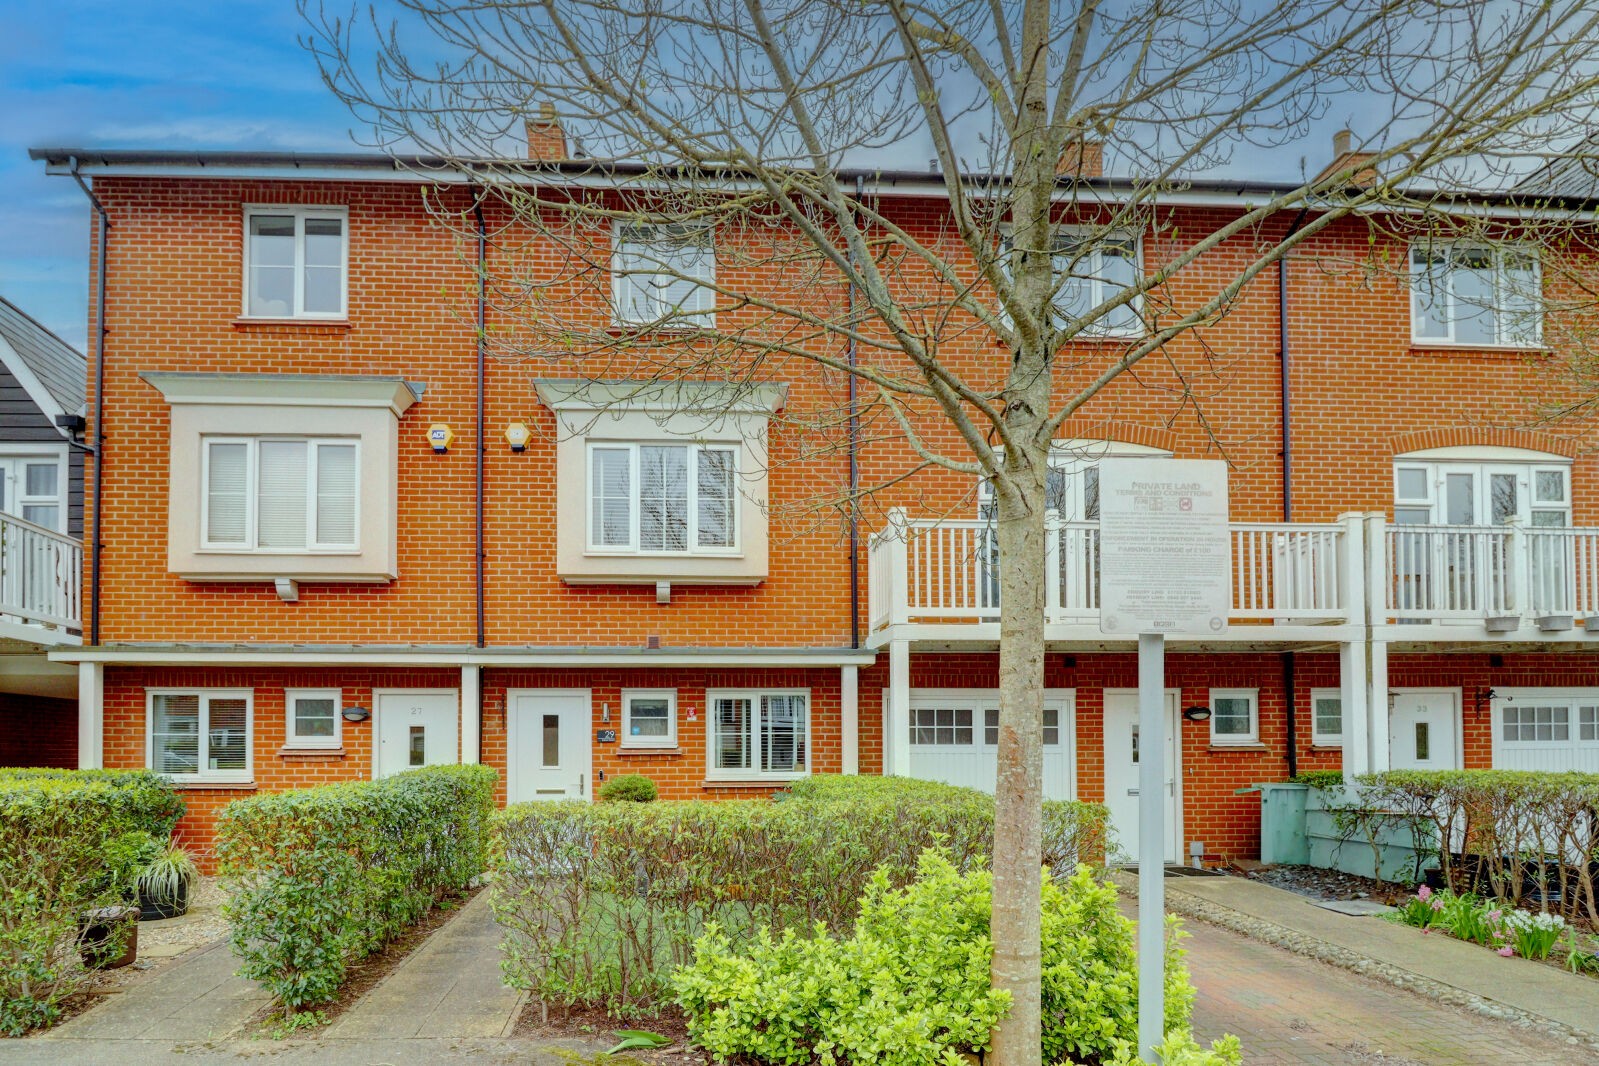 3 bedroom mid terraced house for sale Sierra Road, High Wycombe, HP11, main image